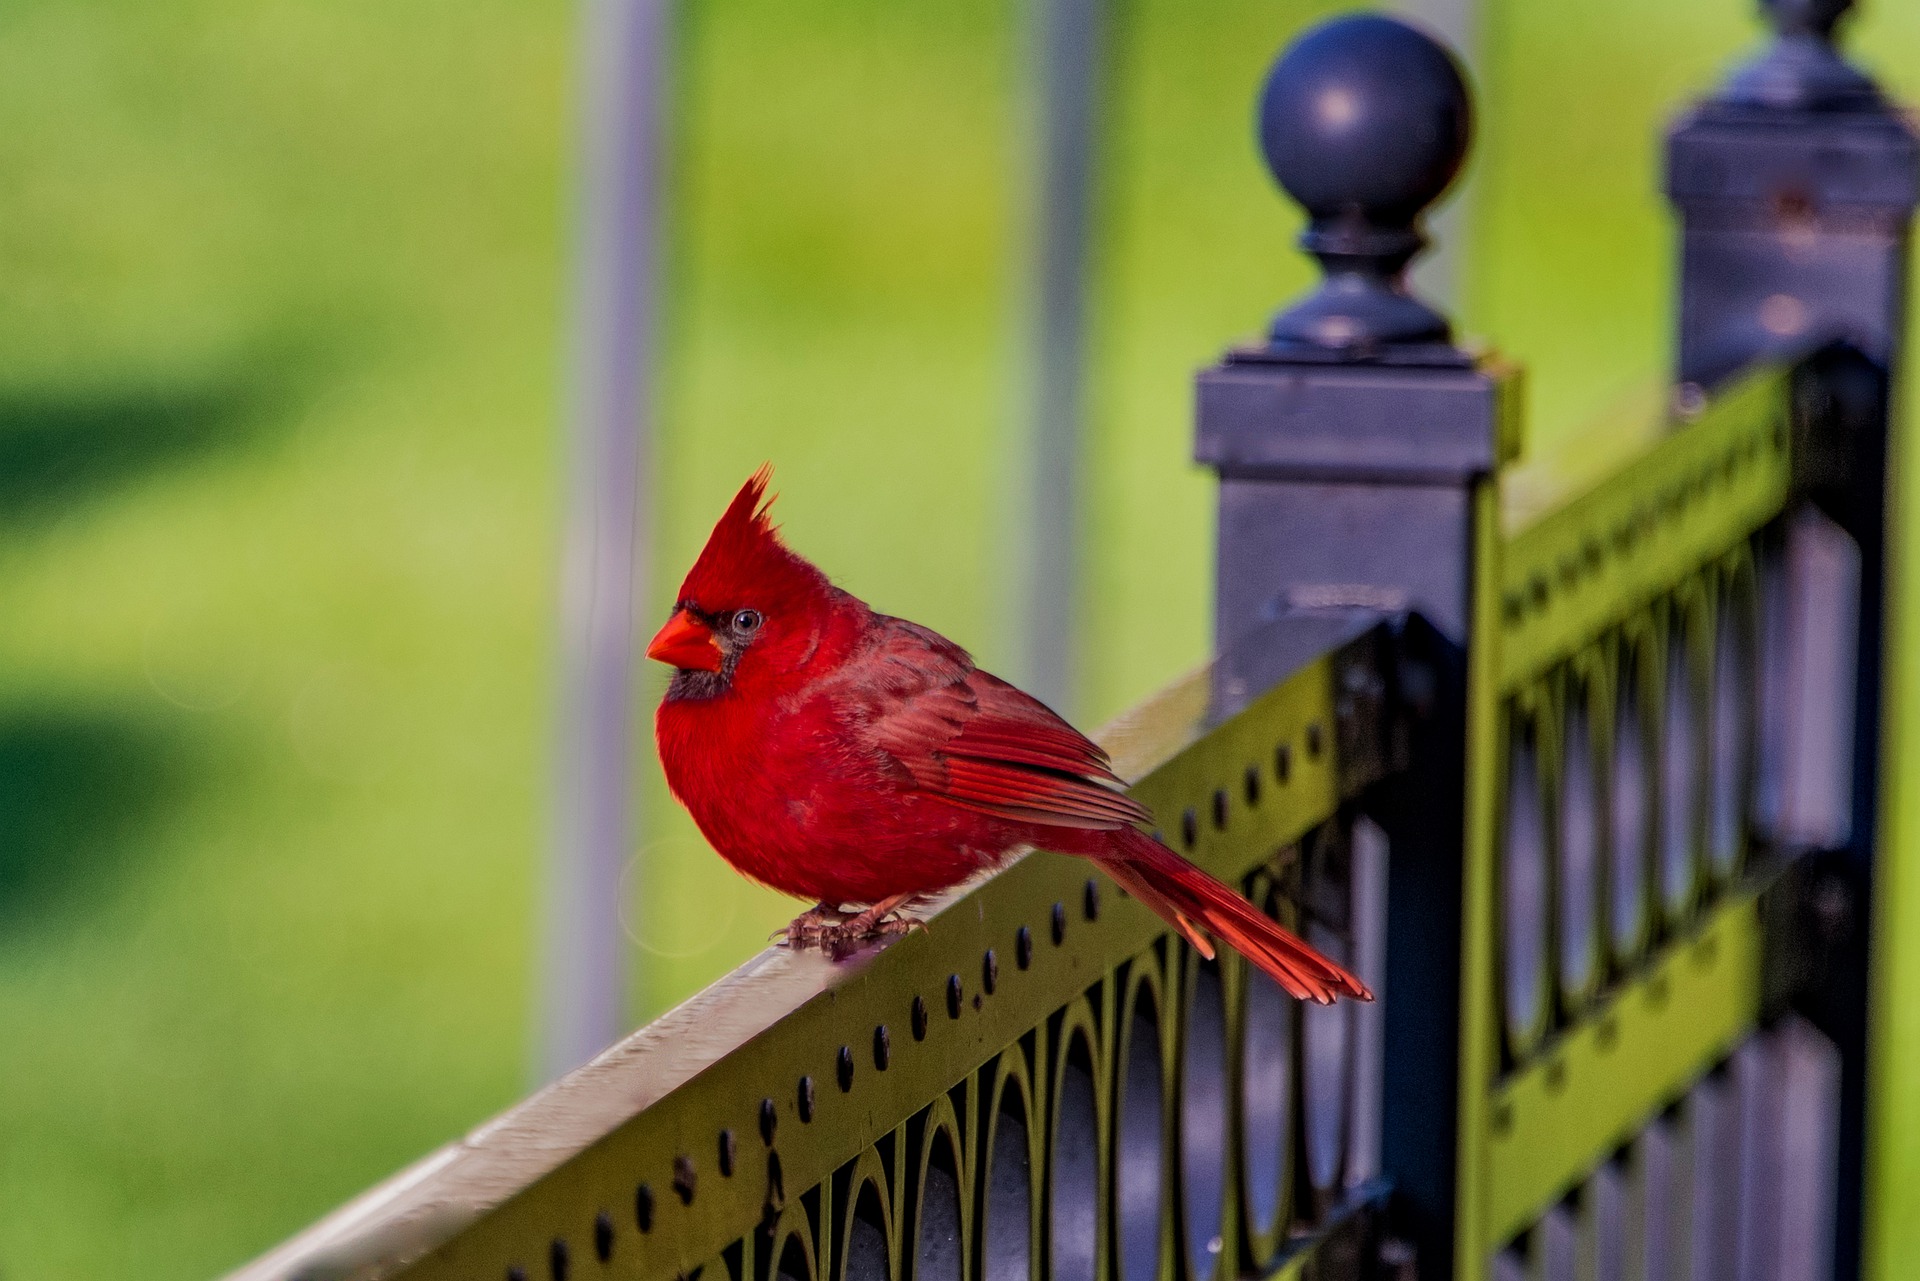 Red cardinal sitting on a fence